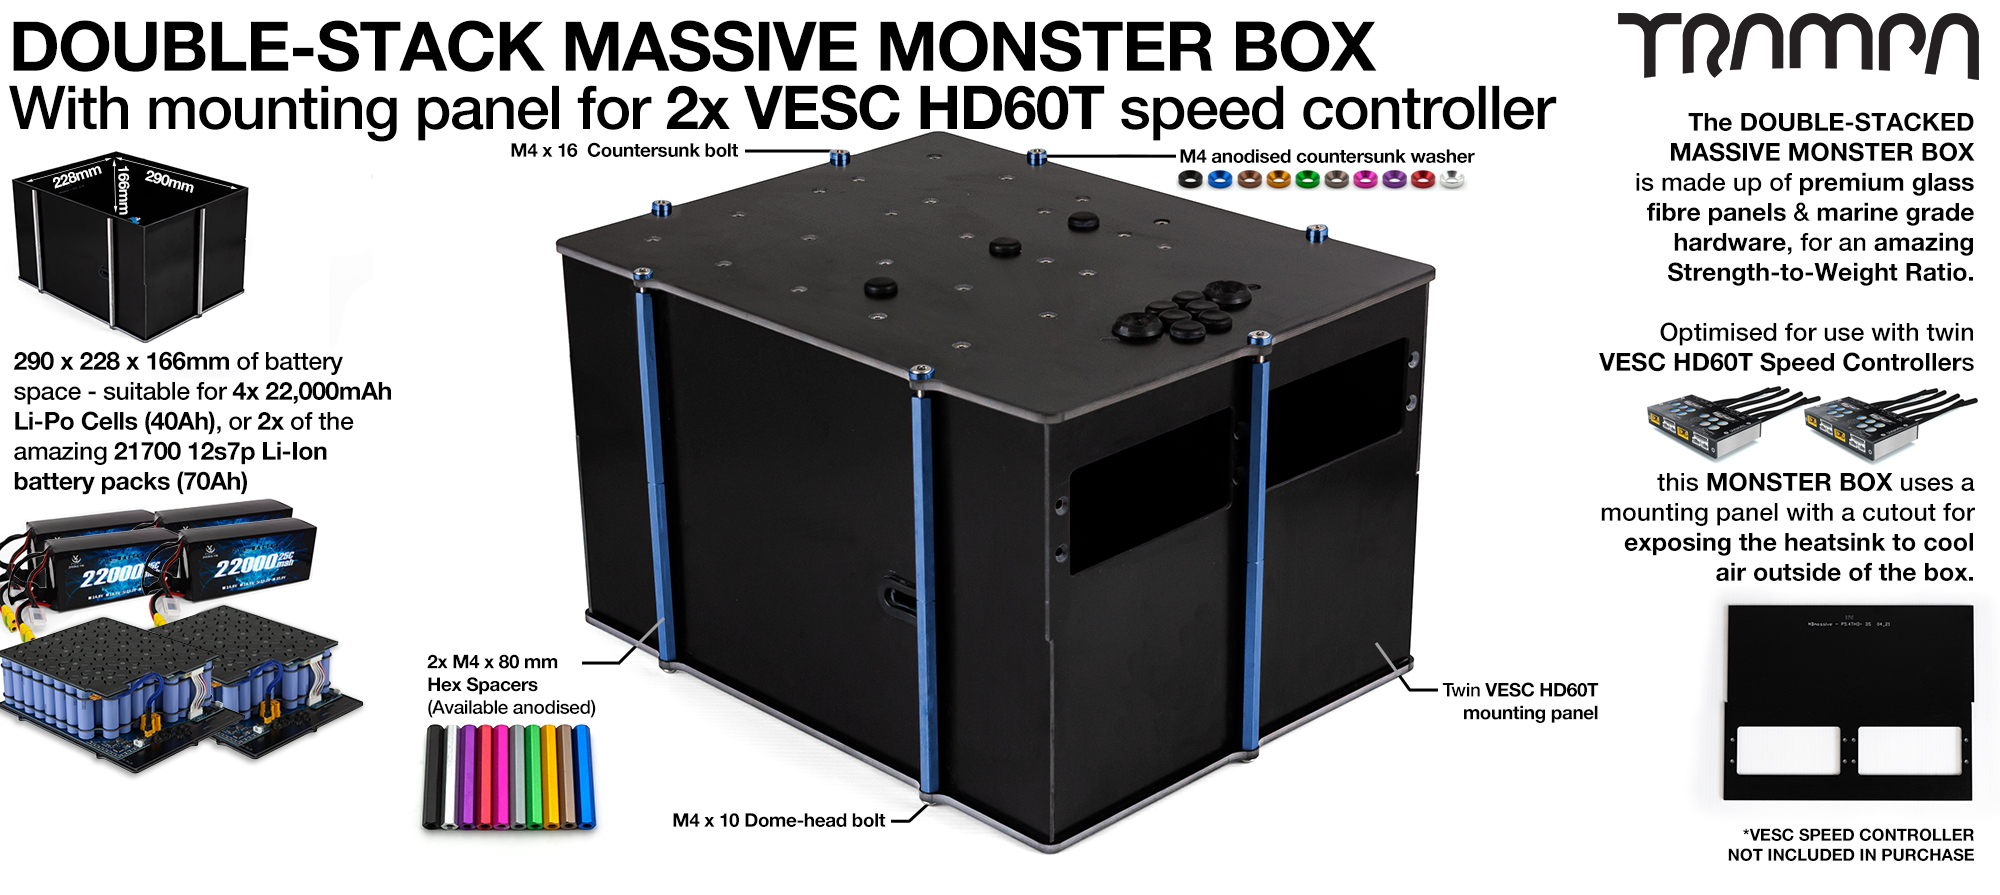 4WD DOUBLE STACK MASSIVE MONSTER Box with 2x VESC HD-60Twin Mounting Panel